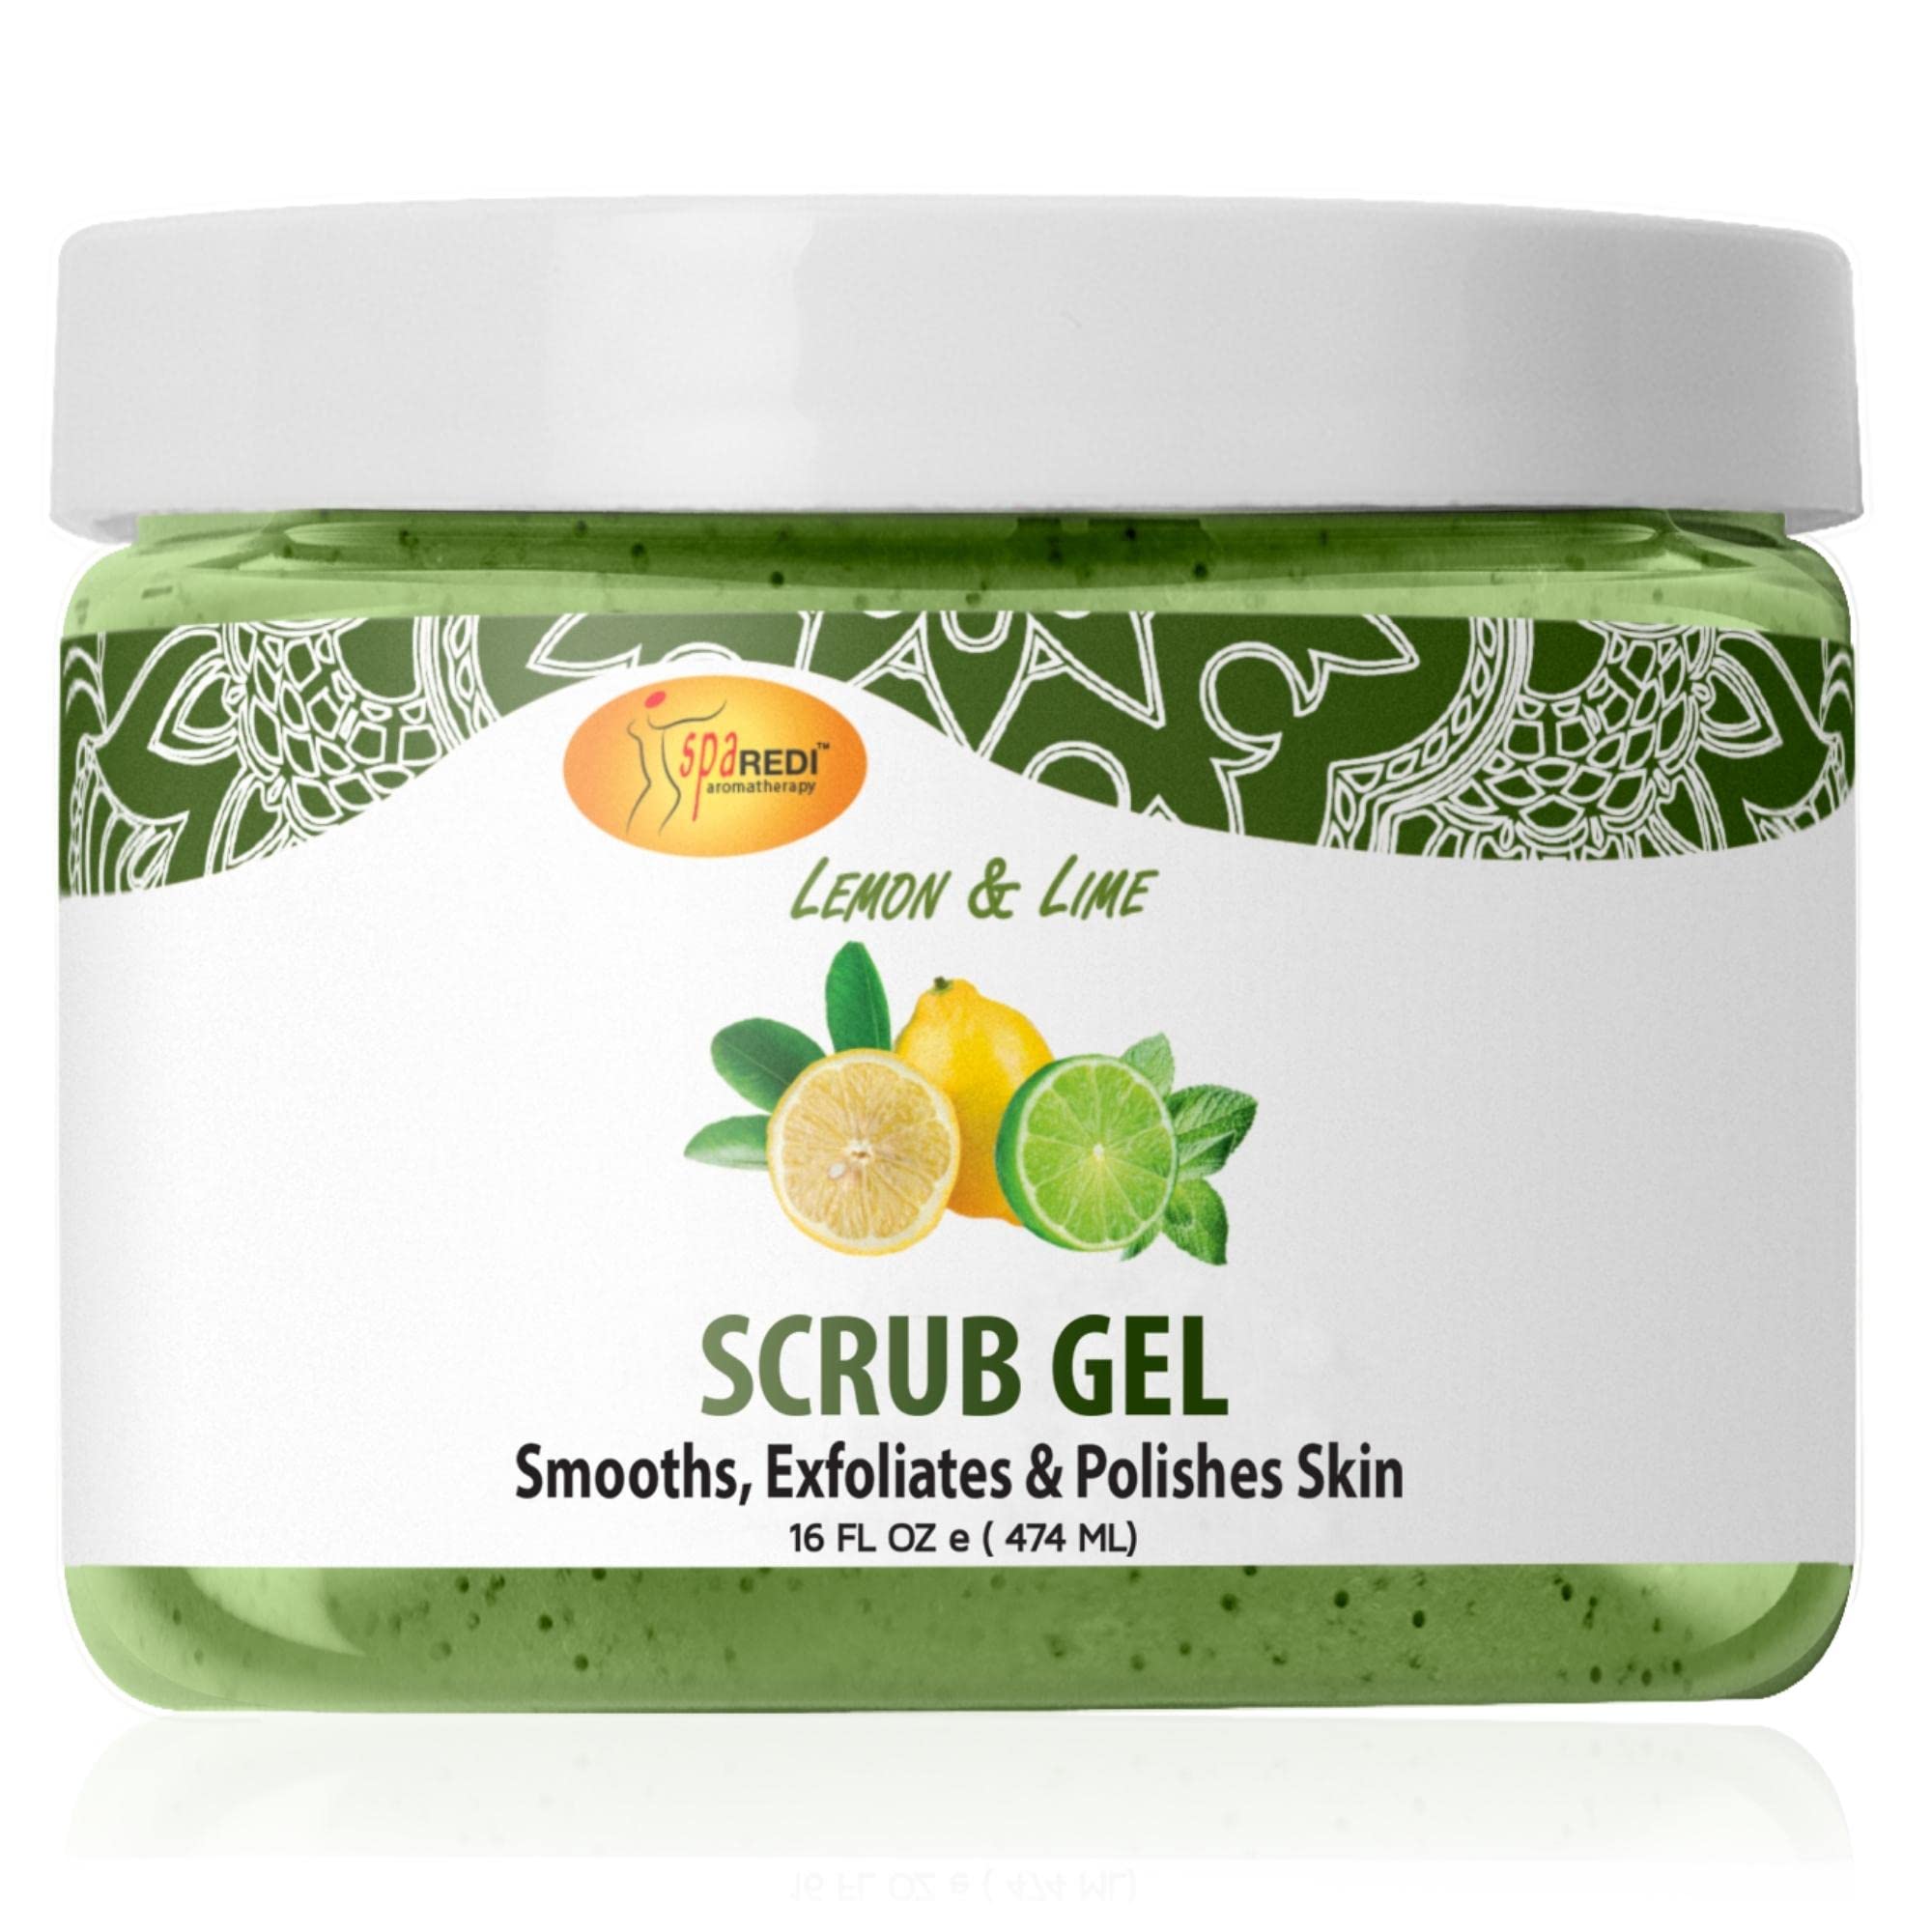 SPA REDI – Exfoliating Scrub Pumice Gel, Lemon & Lime, 16 Oz - Manicure, Pedicure and Body Exfoliator Infused with Hyaluronic Acid, Amino Acids, Panthenol and Comfrey Extract